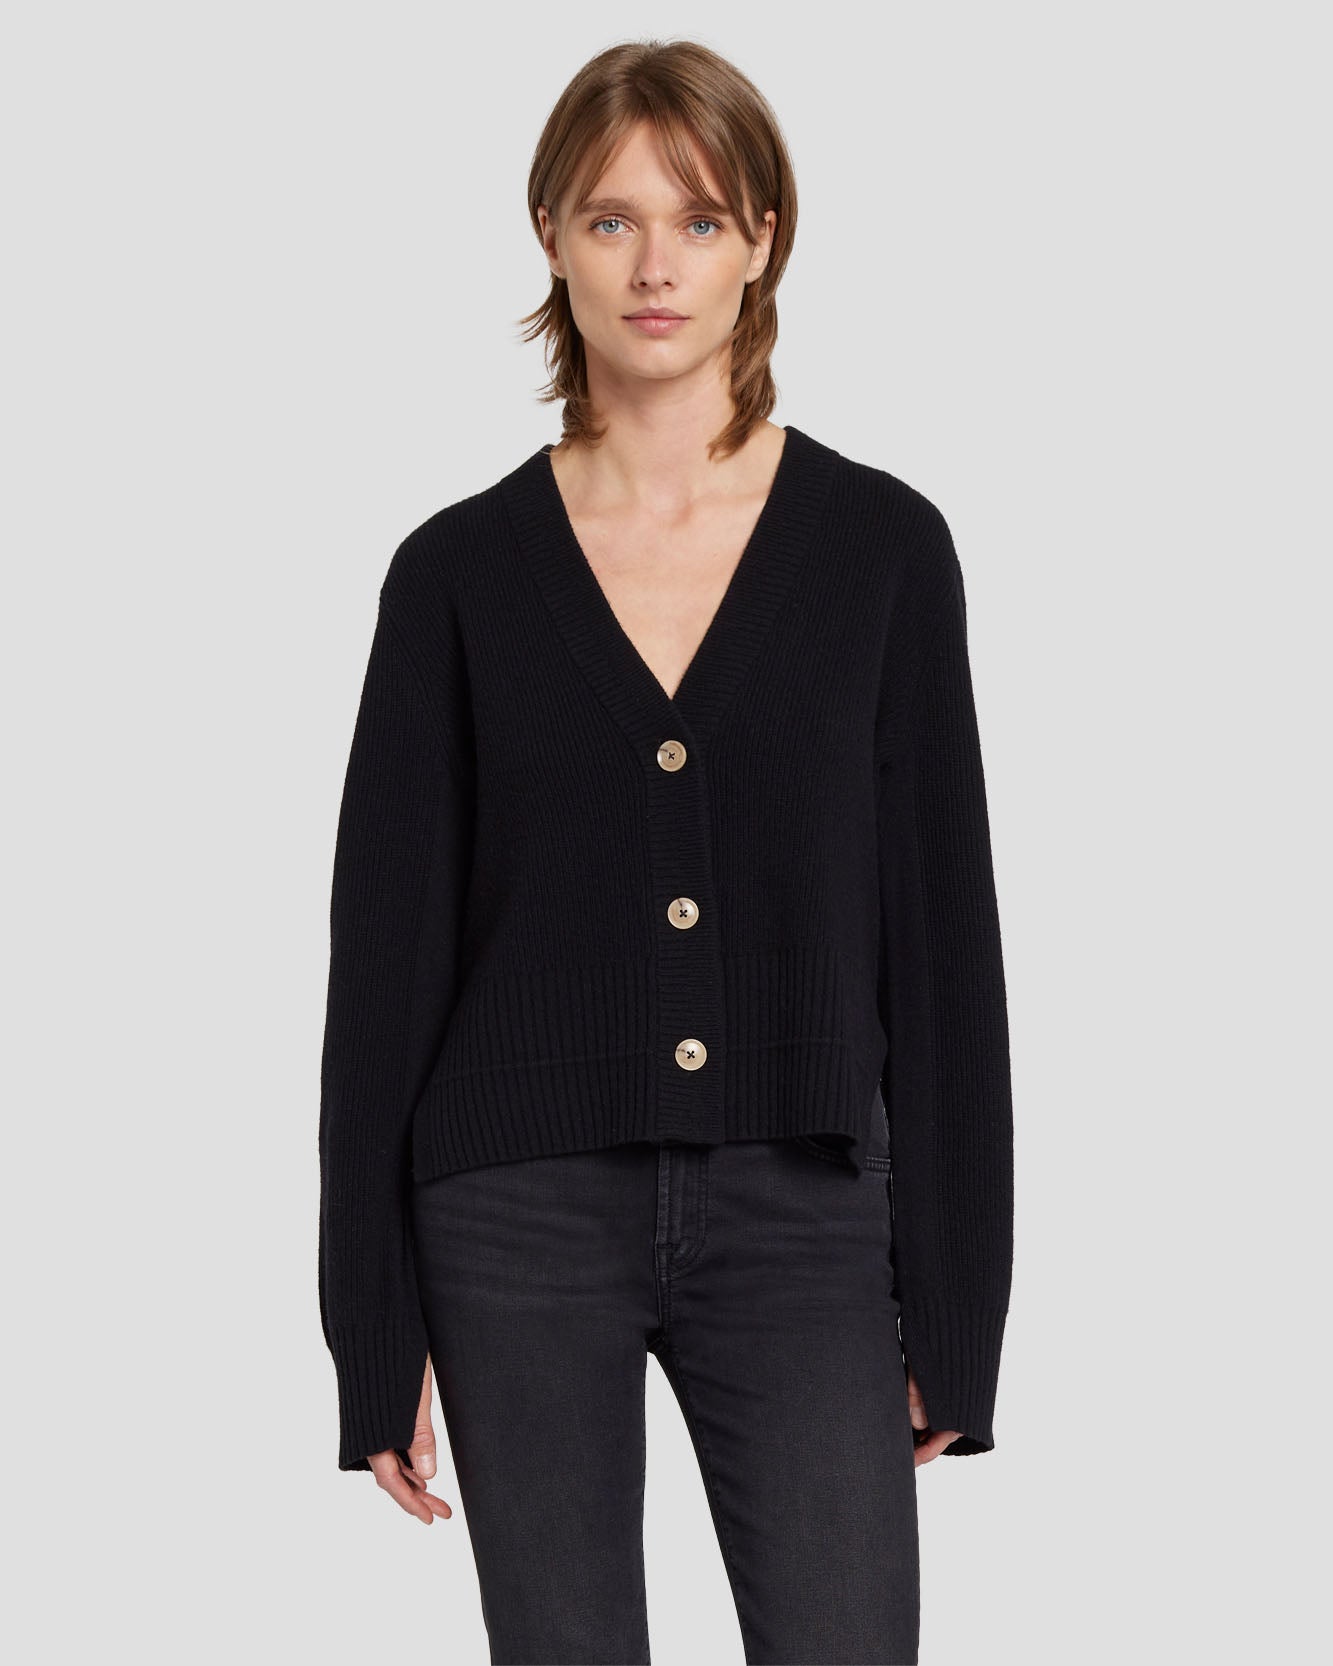 7 For All Mankind Cashmere Cardigan in Black 7N123F34BLK